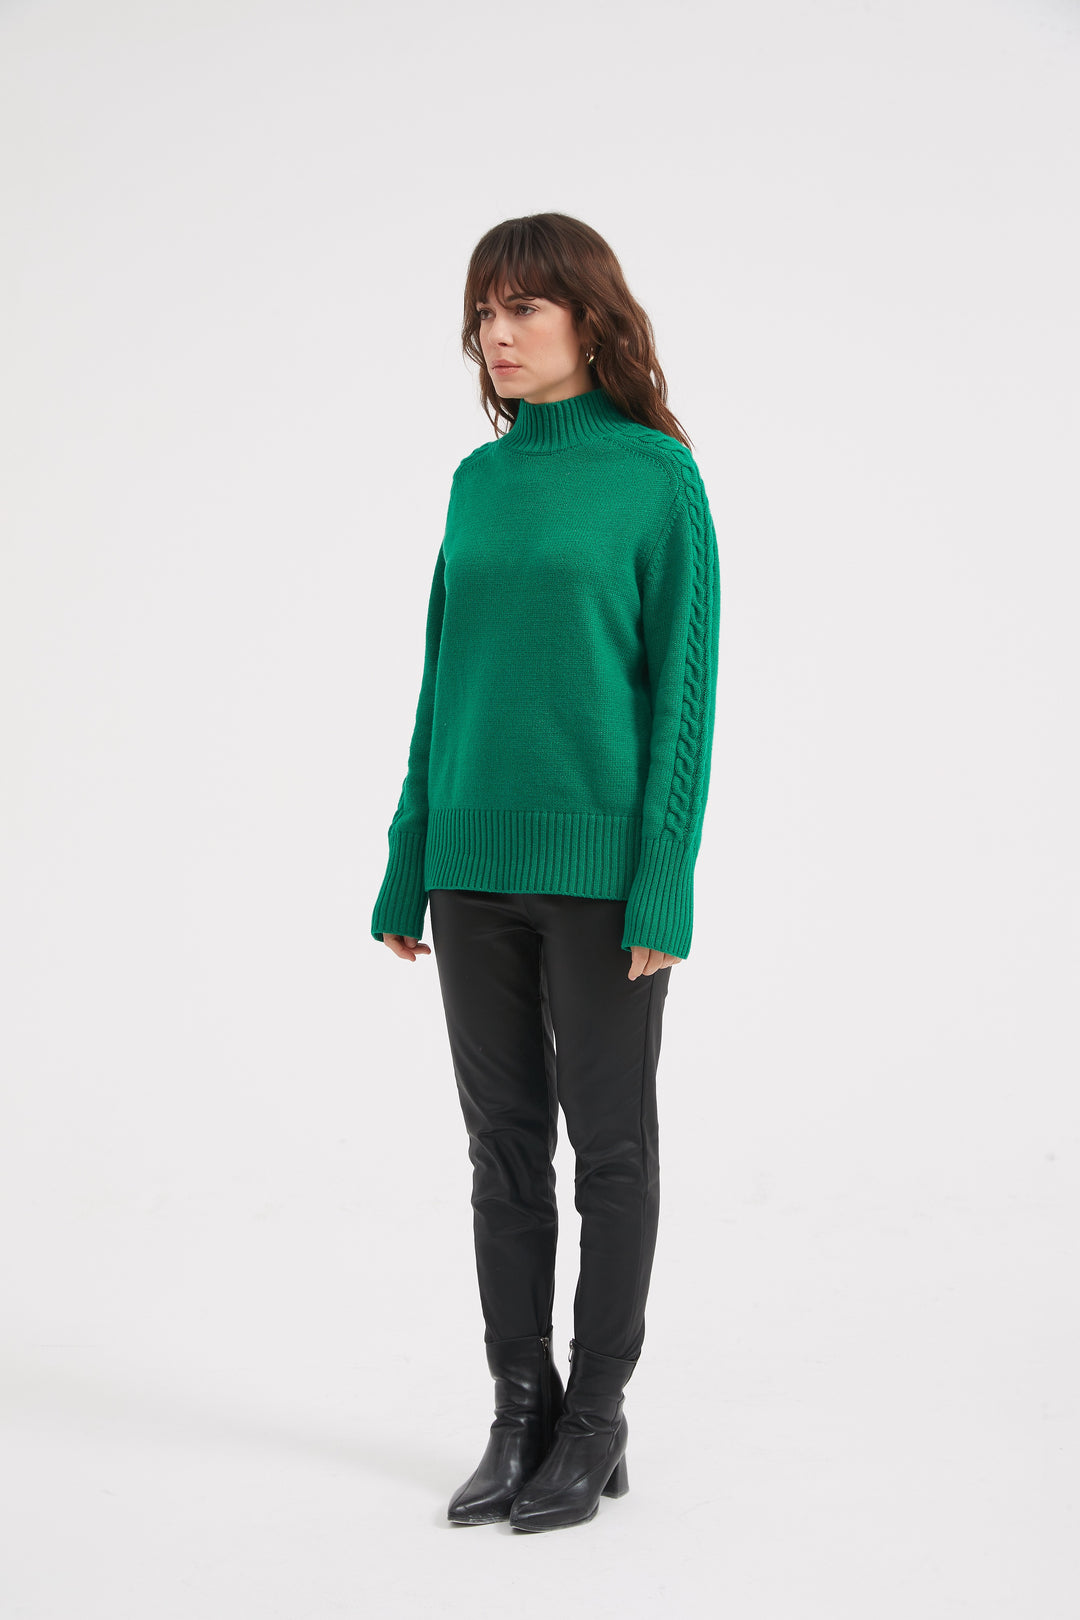 Lawn Green Cable Sleeve Knit